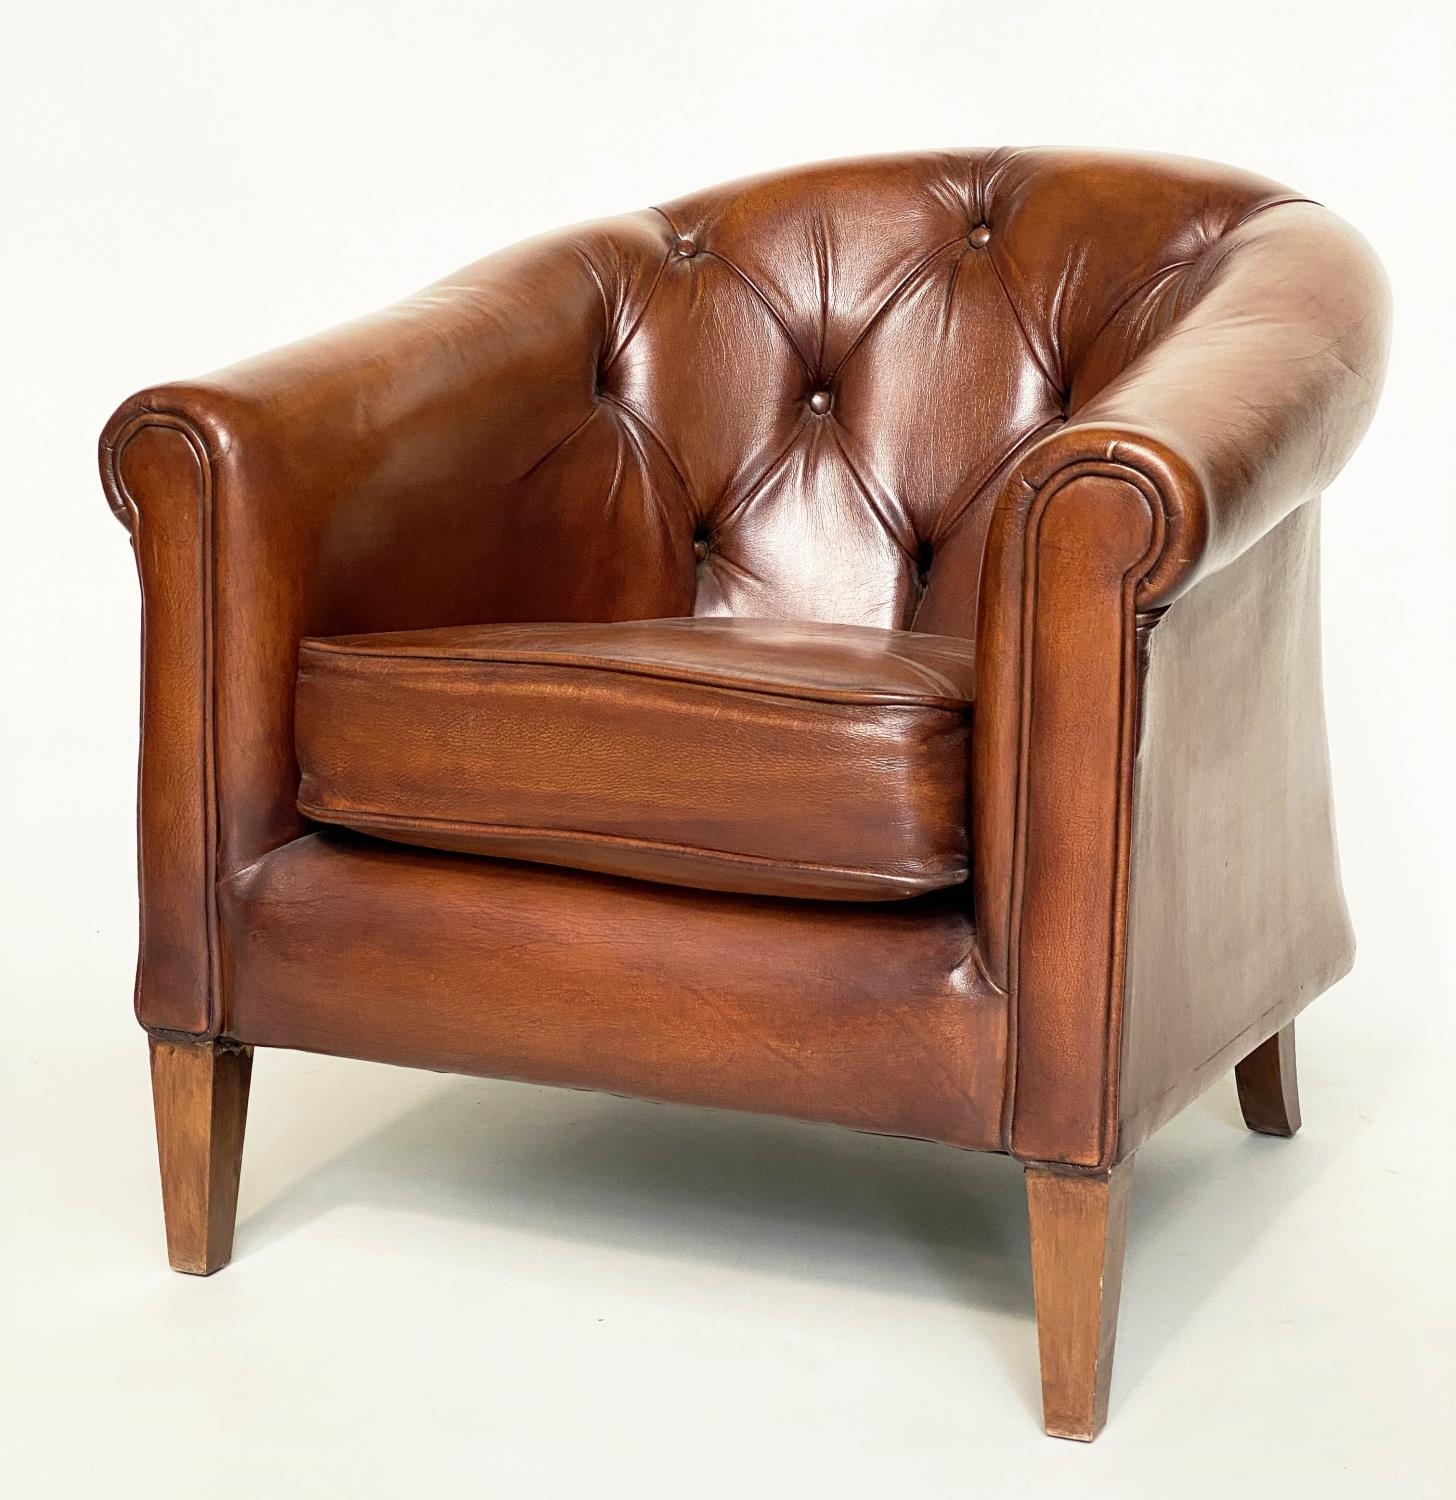 TUB ARMCHAIR BY THOMAS LLOYD, buttoned tan leather with arched back and rounded arms, 78cm W.